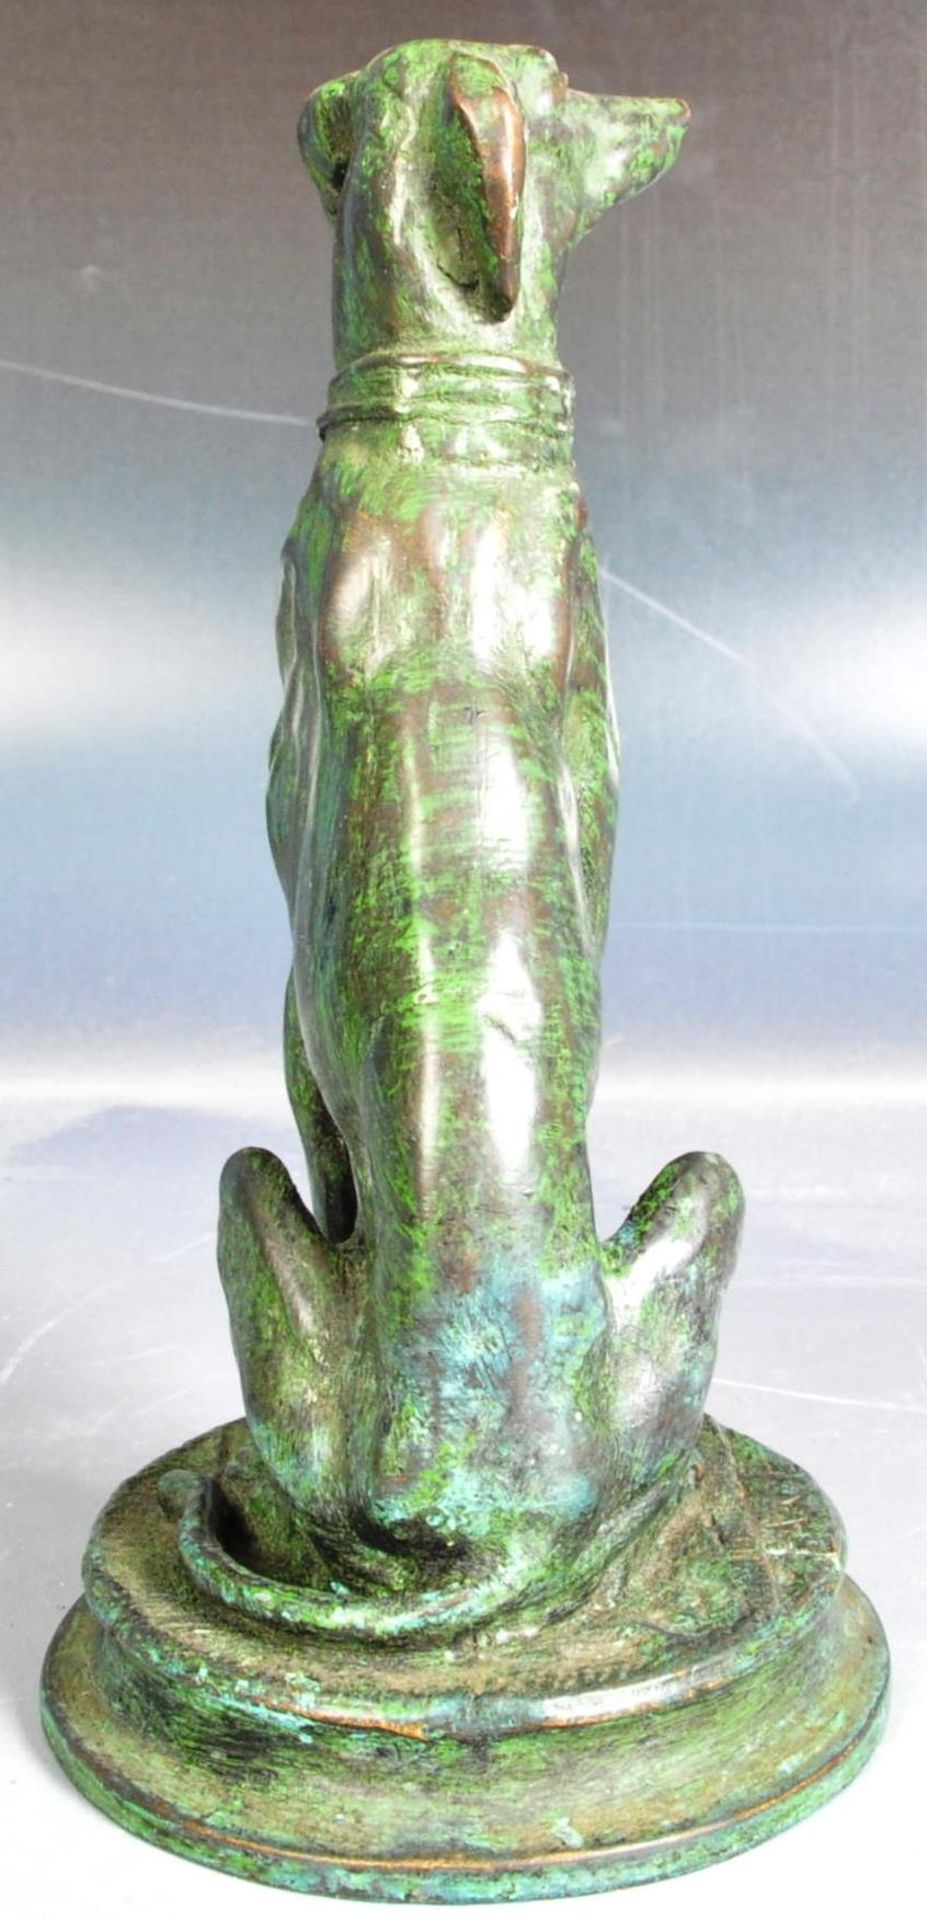 19TH CENTURY BRONZE ORNAMENT FIGURE IN THE FORM OF A GREYHOUND - Image 5 of 5